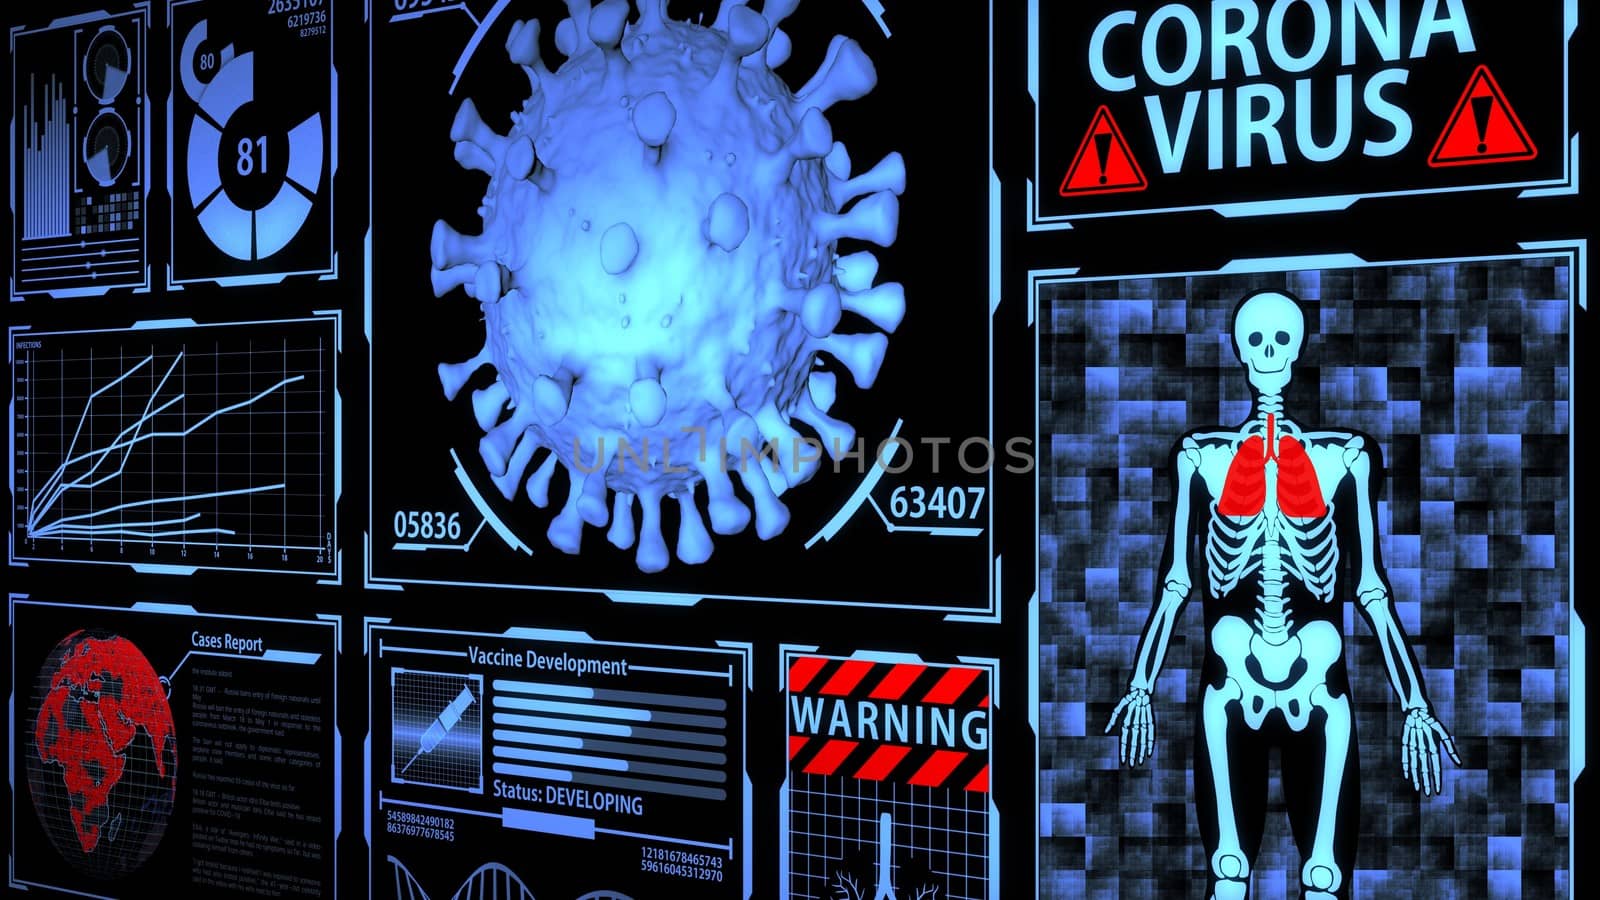 Coronavirus/Covid-19 3D Model in Futuristic Digital Medical HUD with Epidemic Detection, Vaccine Development process and Worldwide Cases Report Background Ver.3